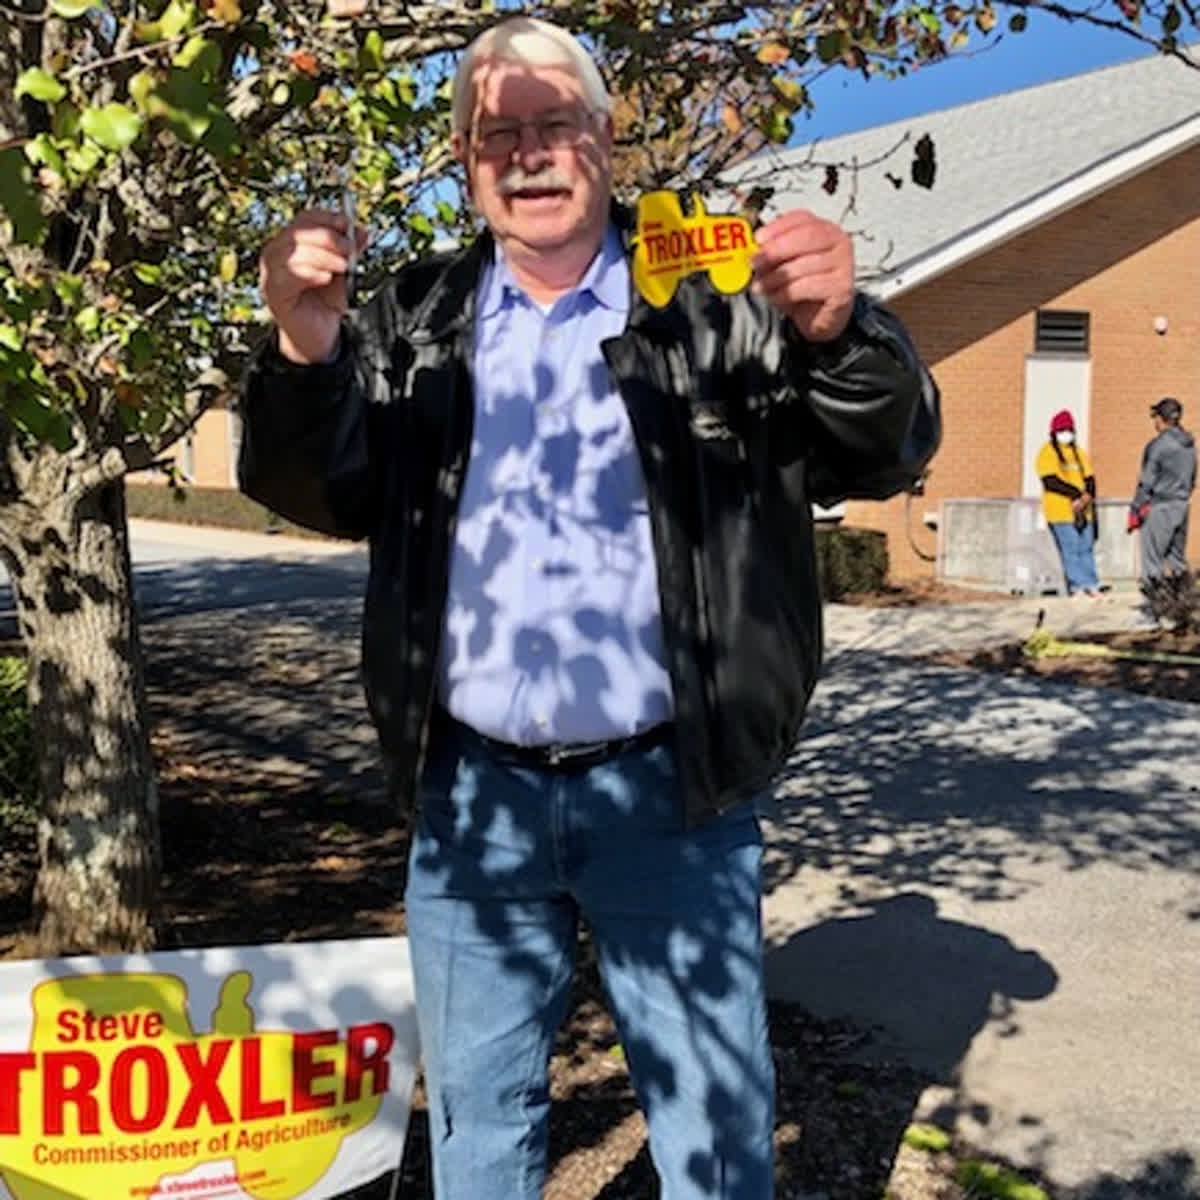 Today is election day & the US constitution gives us the right to vote. We should all fully exercise that right. Sharon & I cast our votes this morning. Please vote today and do so safely! Thanks for your support. #SteveTroxler2020 #FarmersForTroxler #NCAgriculture'